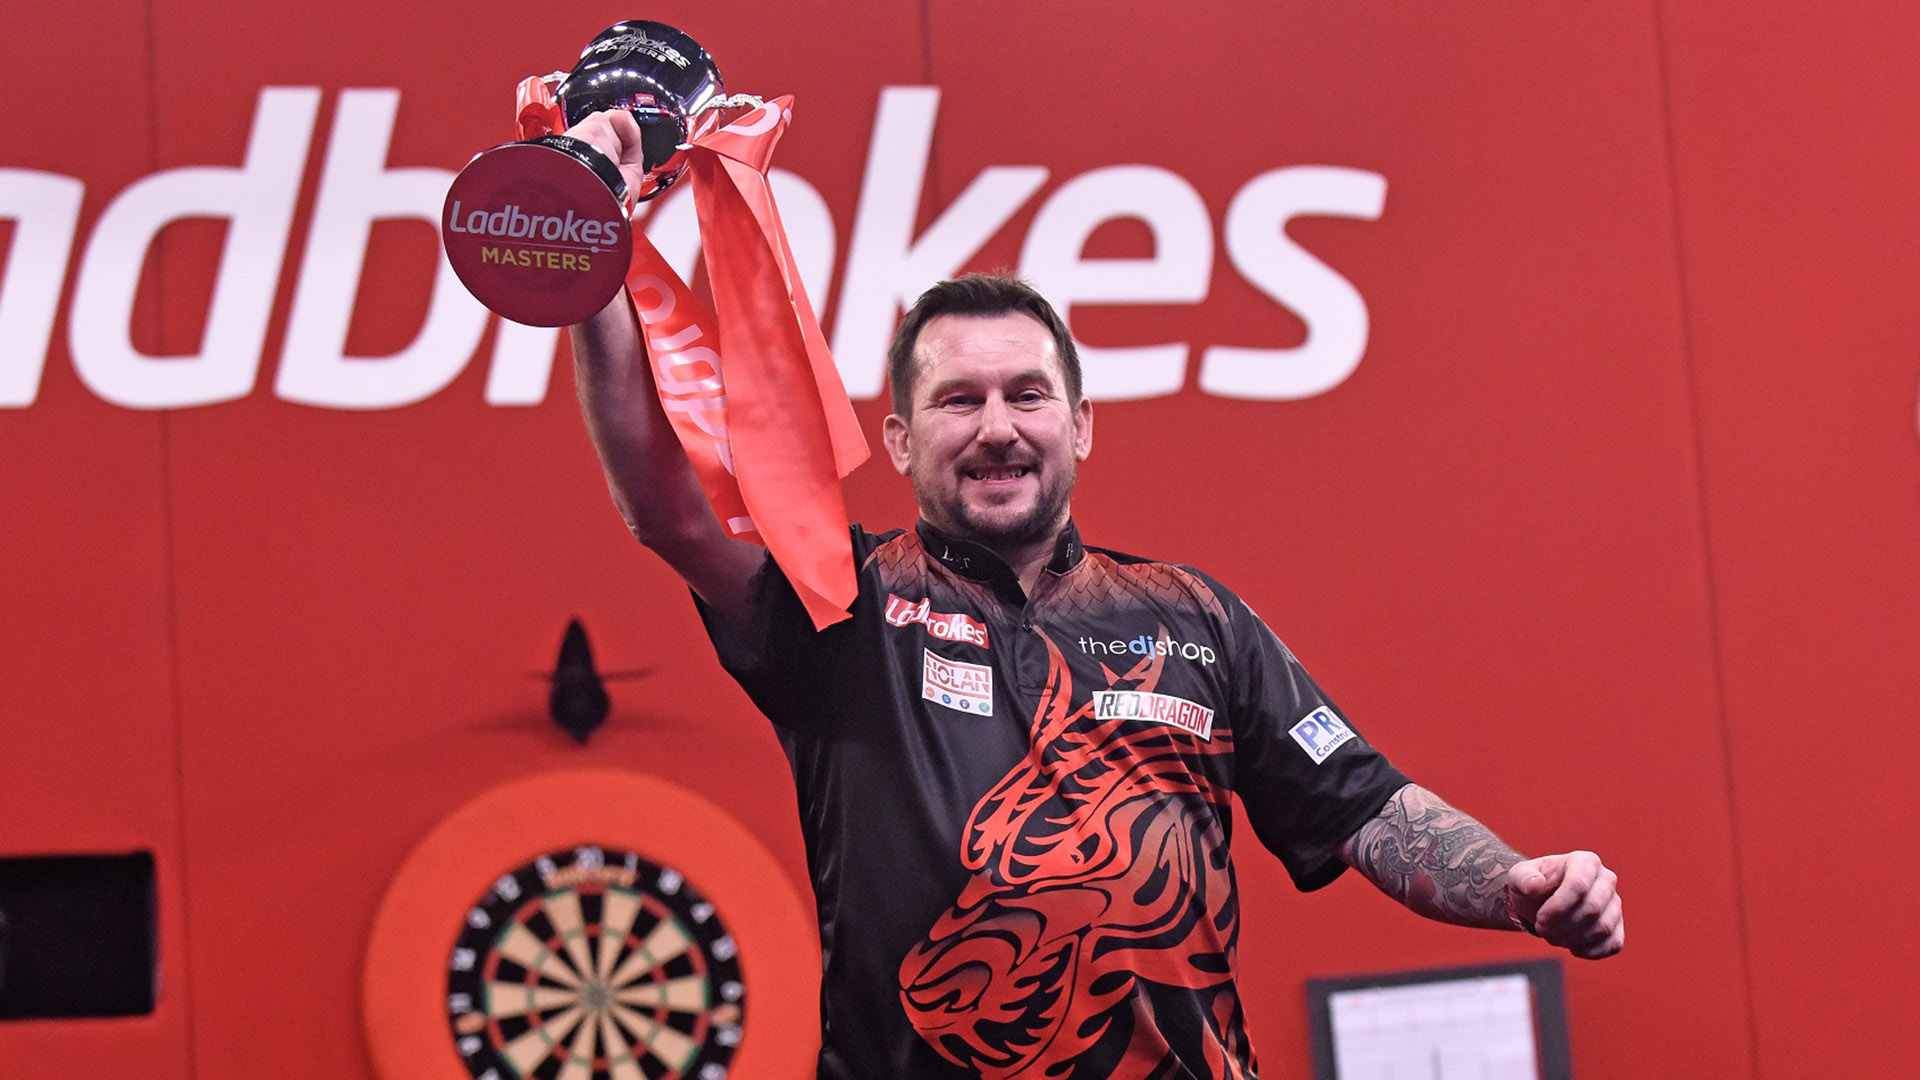 Darts results: Record-breaking Clayton wins Masters and takes the last League spot